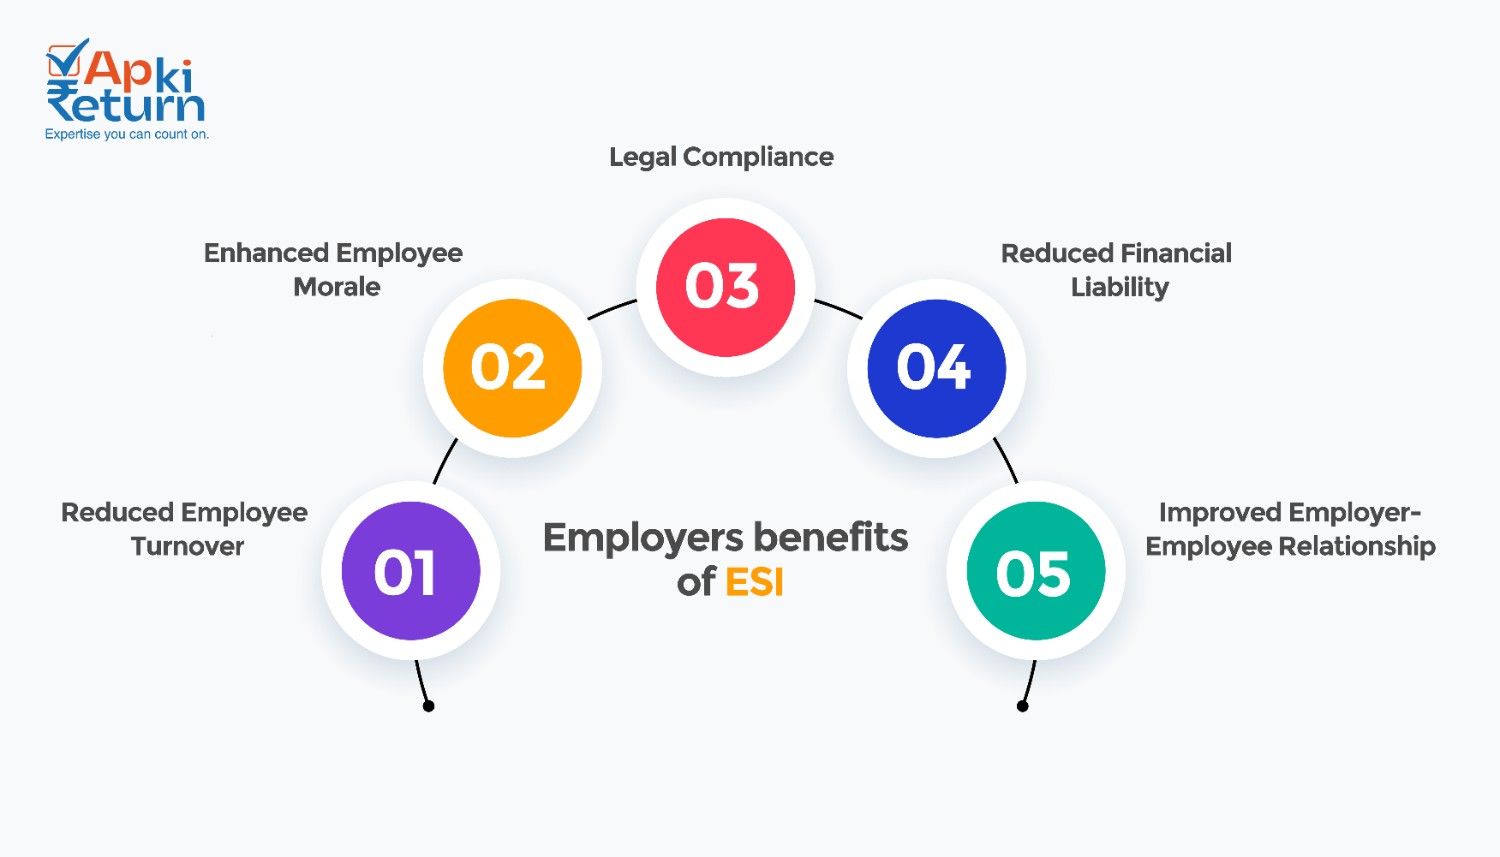 Benefits for Employers